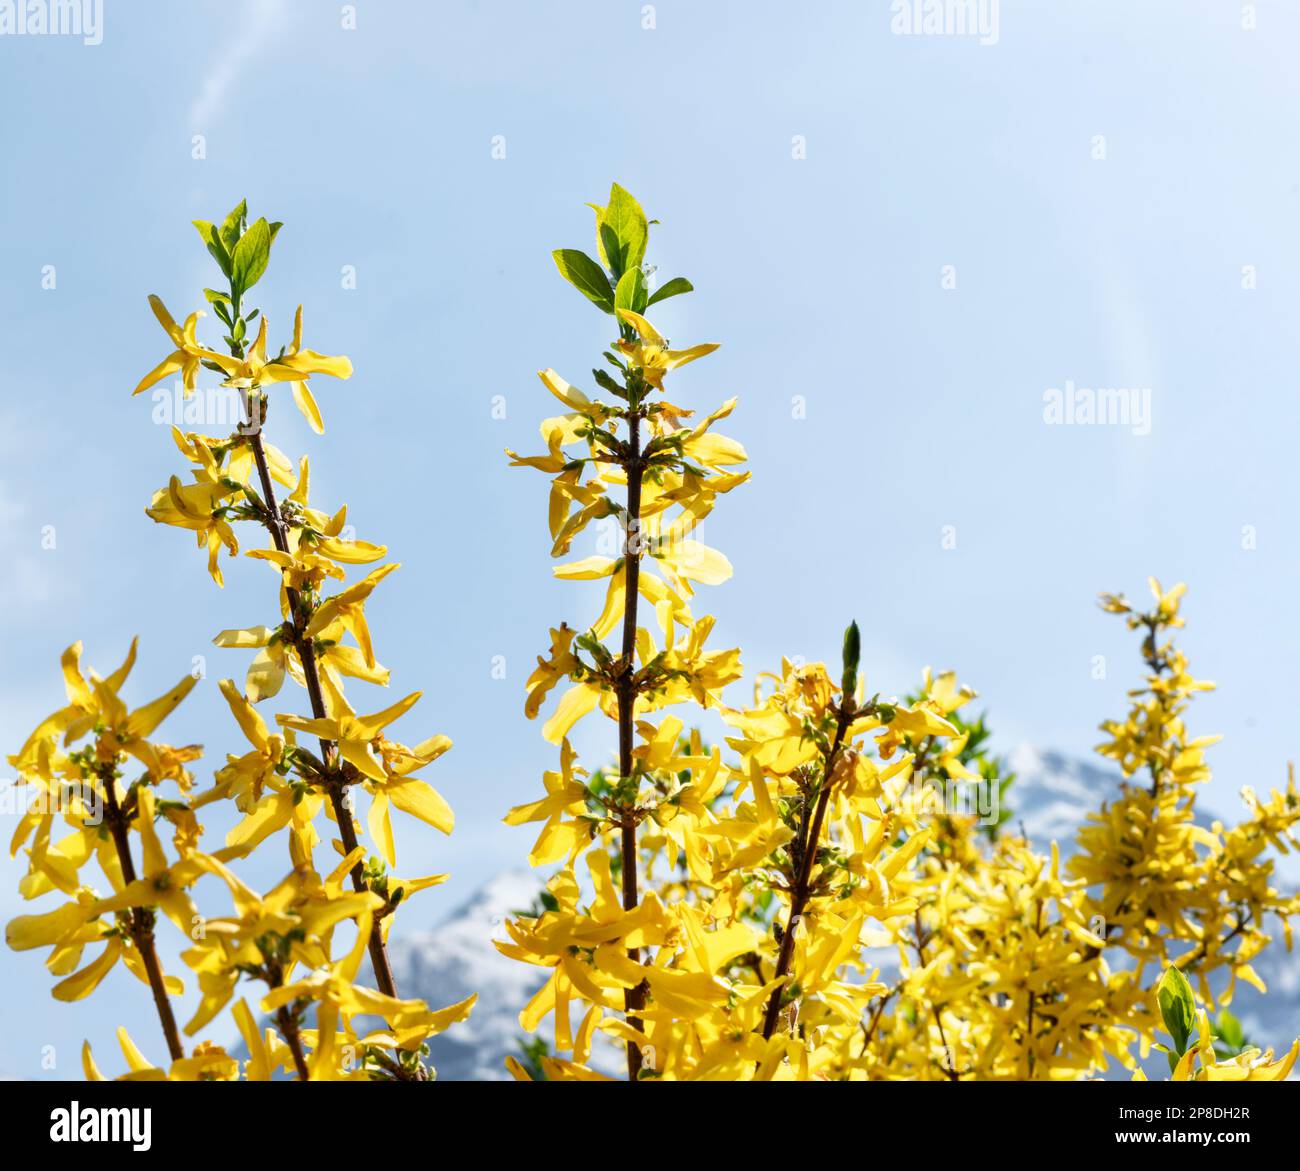 spring or summer landscape flowering plant with yellow forsythia flowers against snow capped mountain peaks and blue sky beauty in nature landscaping Stock Photo